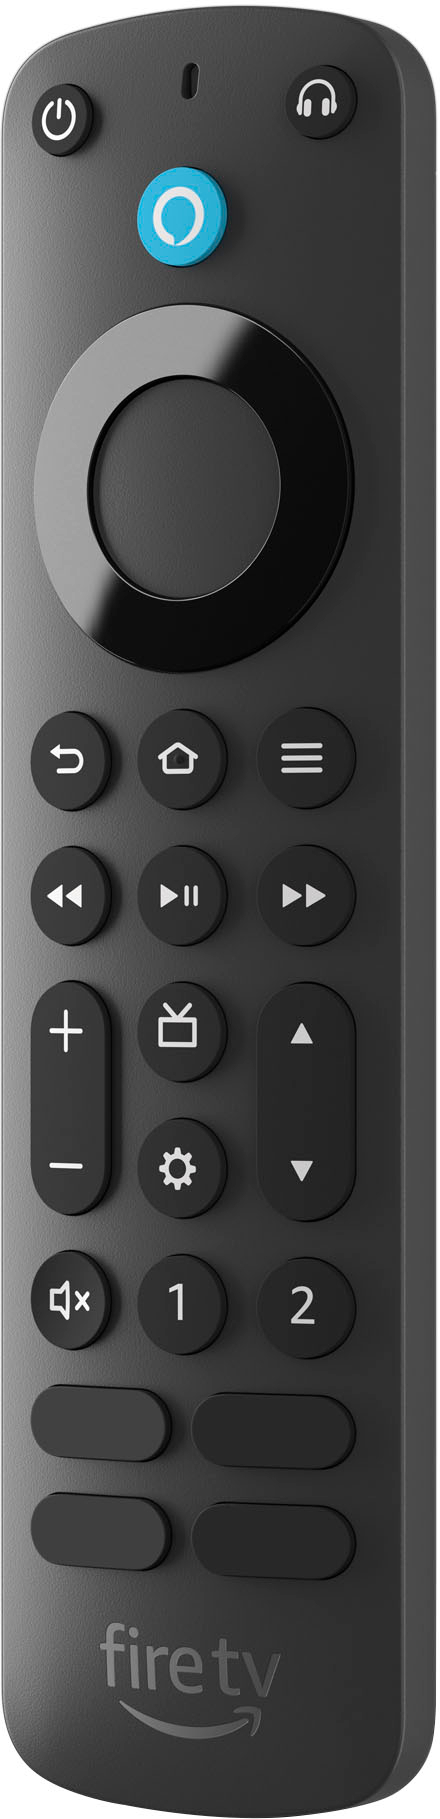 Angle View: Amazon - Alexa Voice Remote Pro 2022 with Remote Finder  TV Controls  Backlit Buttons and requires compatible Fire TV device - Black